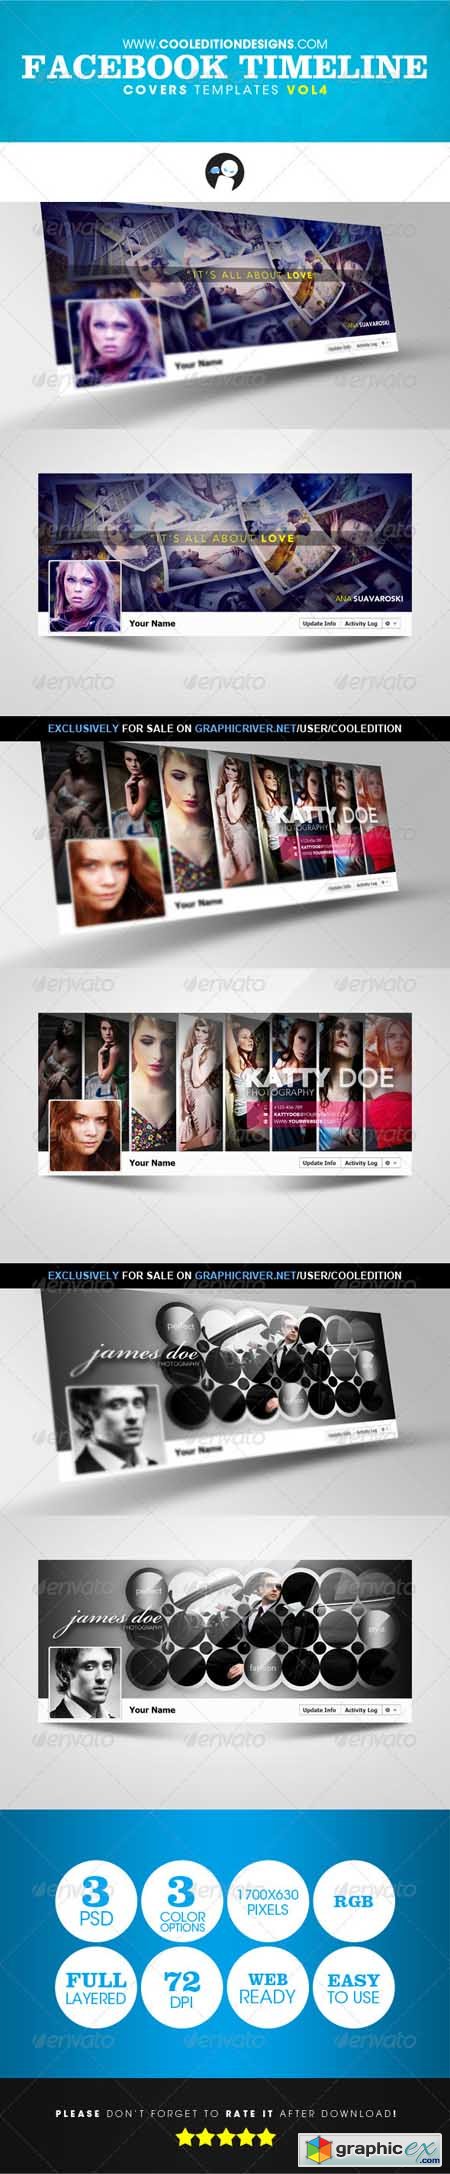 Facebook Timeline Covers Templates VOL4